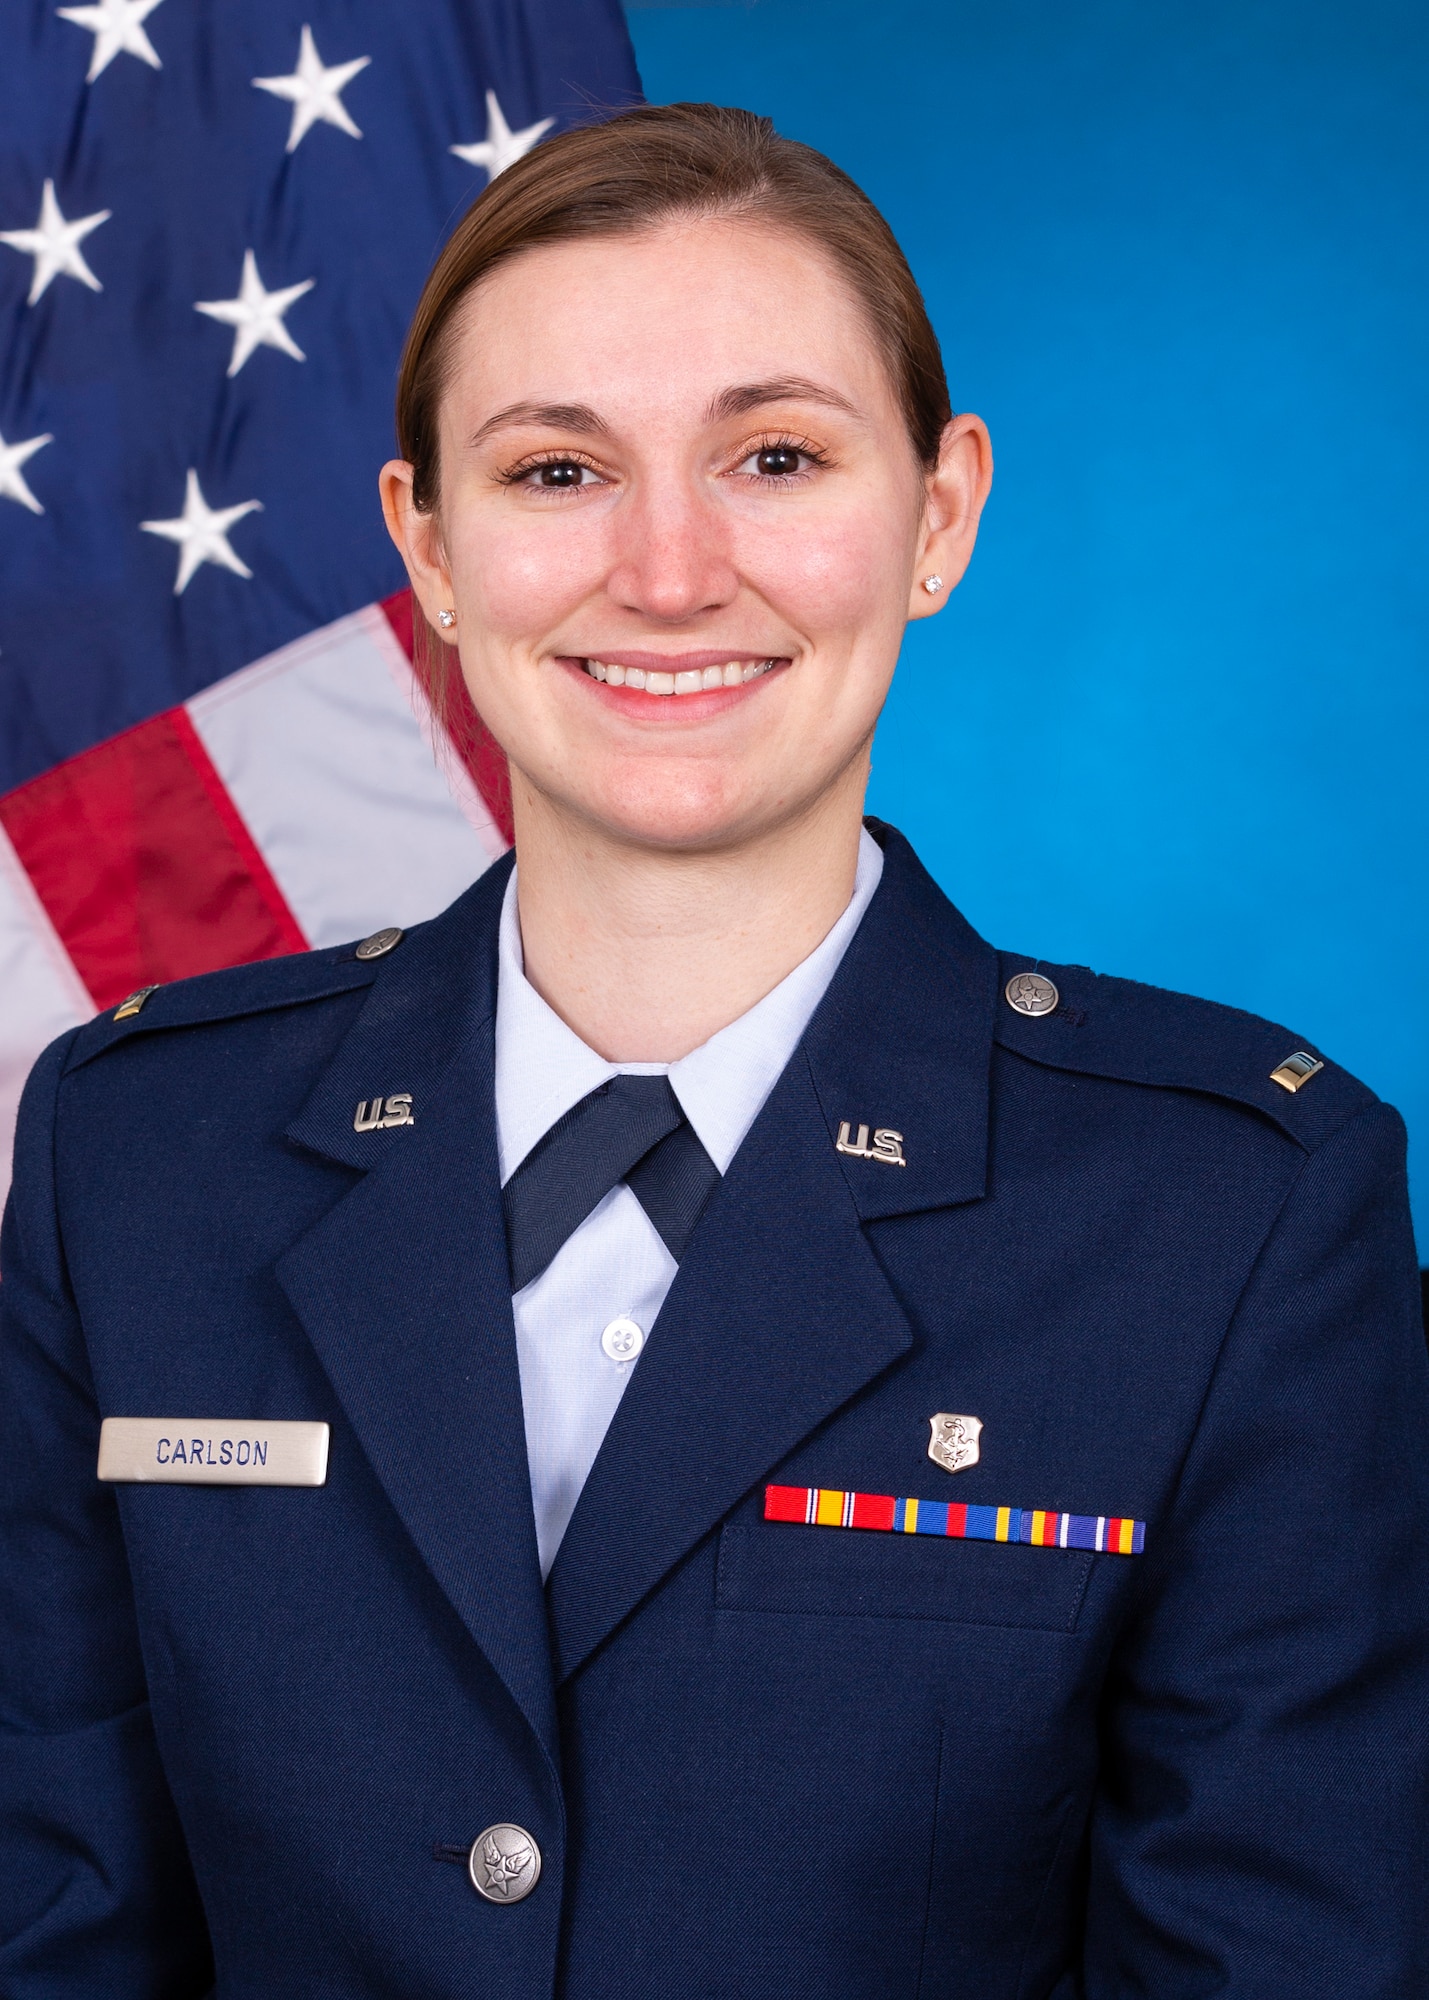 In recognition of Women’s History Month, 1st Lt. Alexis Carlson, 932nd Medical Squadron, shared her perspective on serving as a woman in the military, the obstacles she has overcome, and her thoughts on the service's initiatives to achieve a rich, diverse and inclusive force.